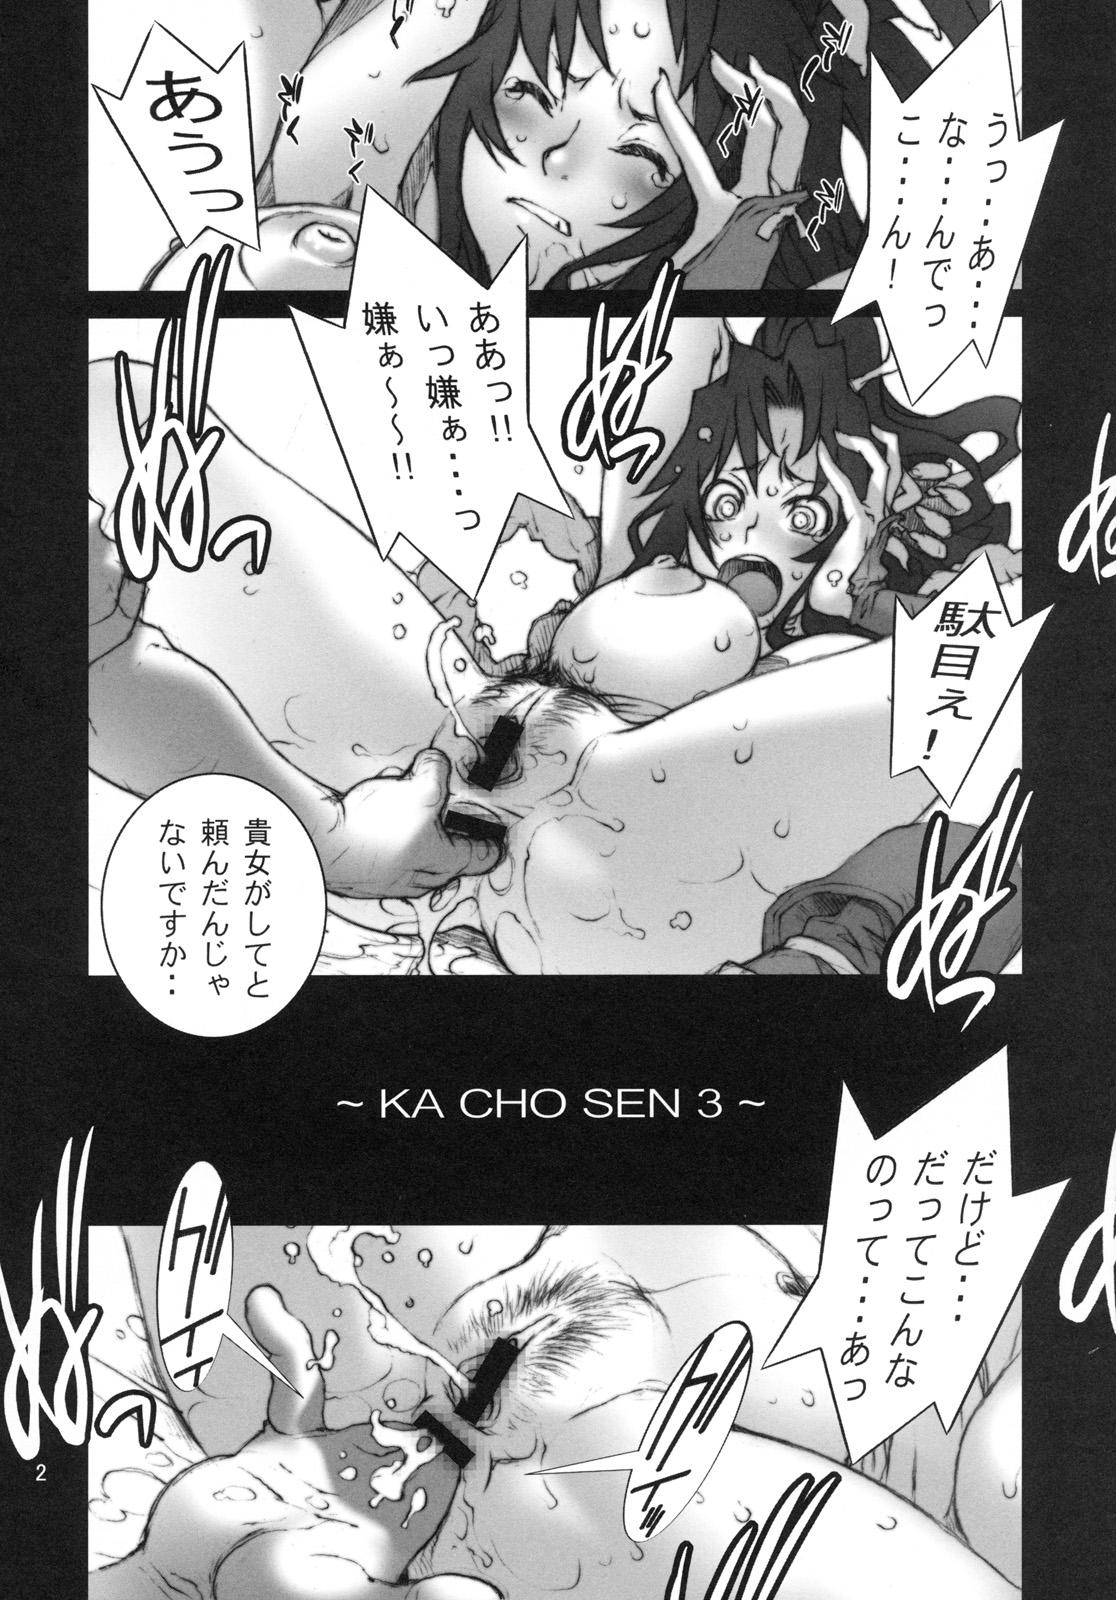 Celebrity Porn Kachousen San - King of fighters Curious - Page 3